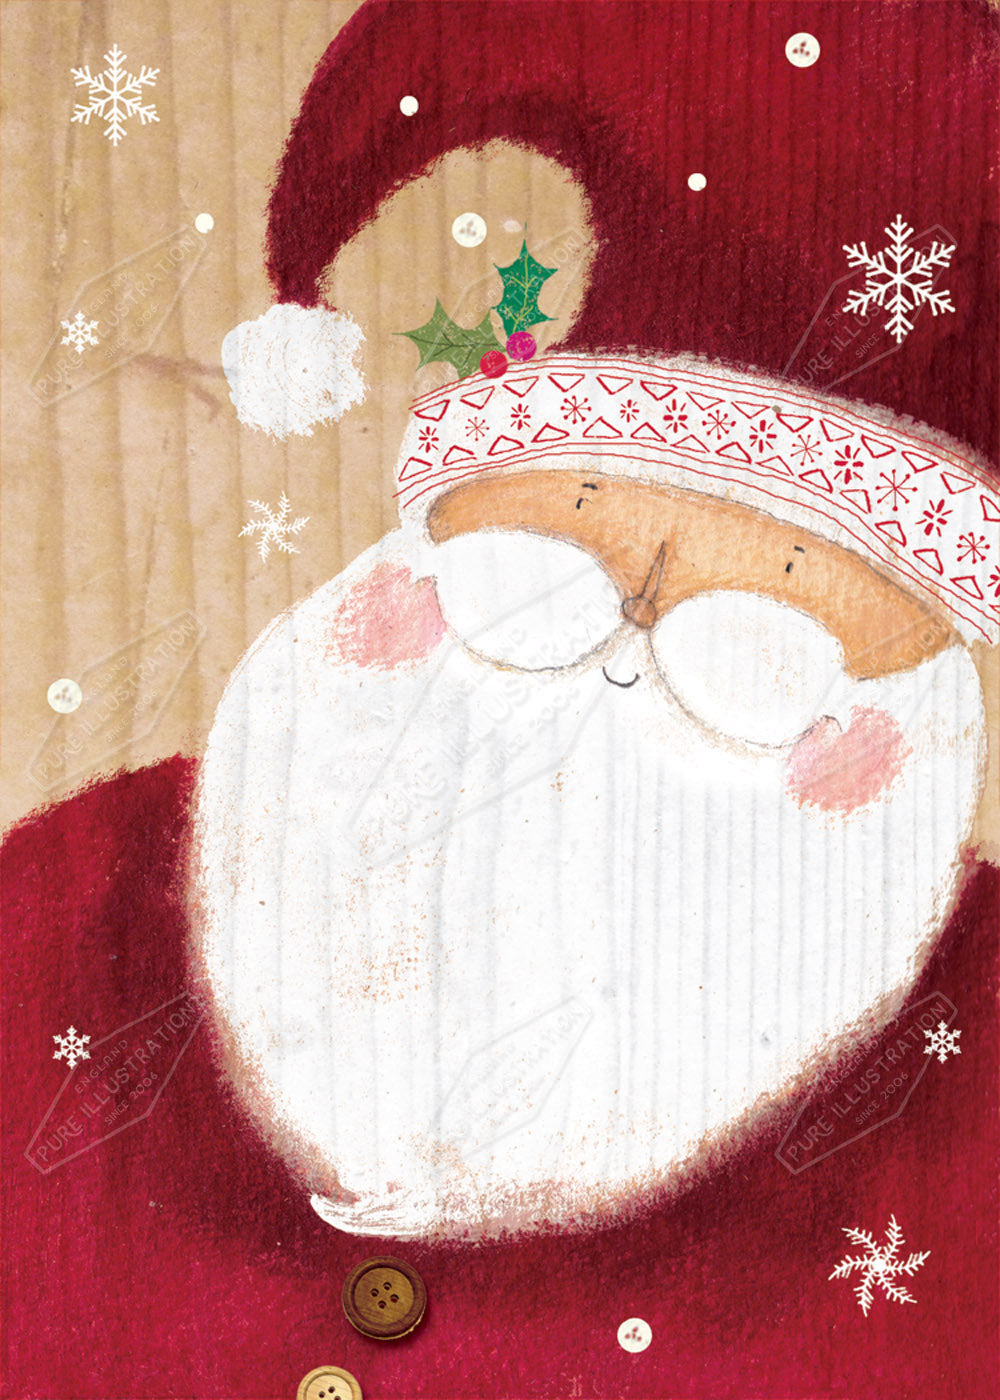 00029589CRE - Santa by Cory Reid - Pure Art Licensing Agency & Surface Design Agency